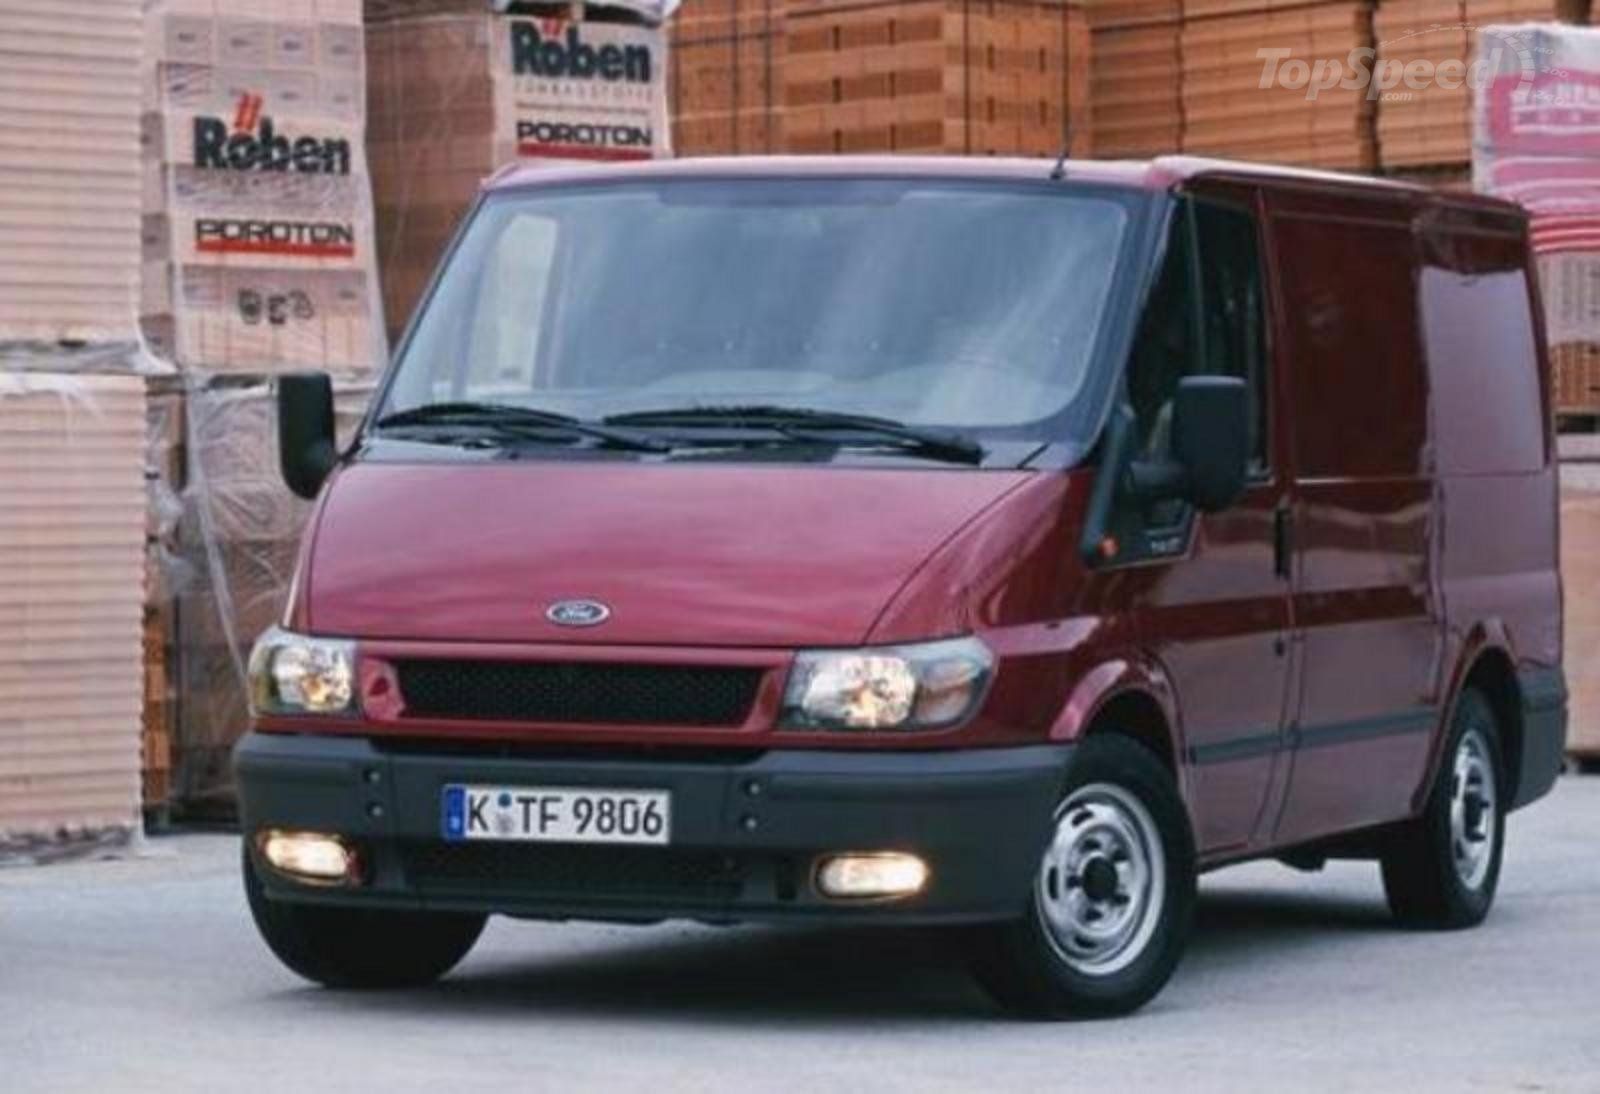 Форд транзит 2.0 2000 2006. Ford Transit 2000. Ford Transit 1995 2000. Ford Transit 2000 фургон. Ford Транзит 2000.